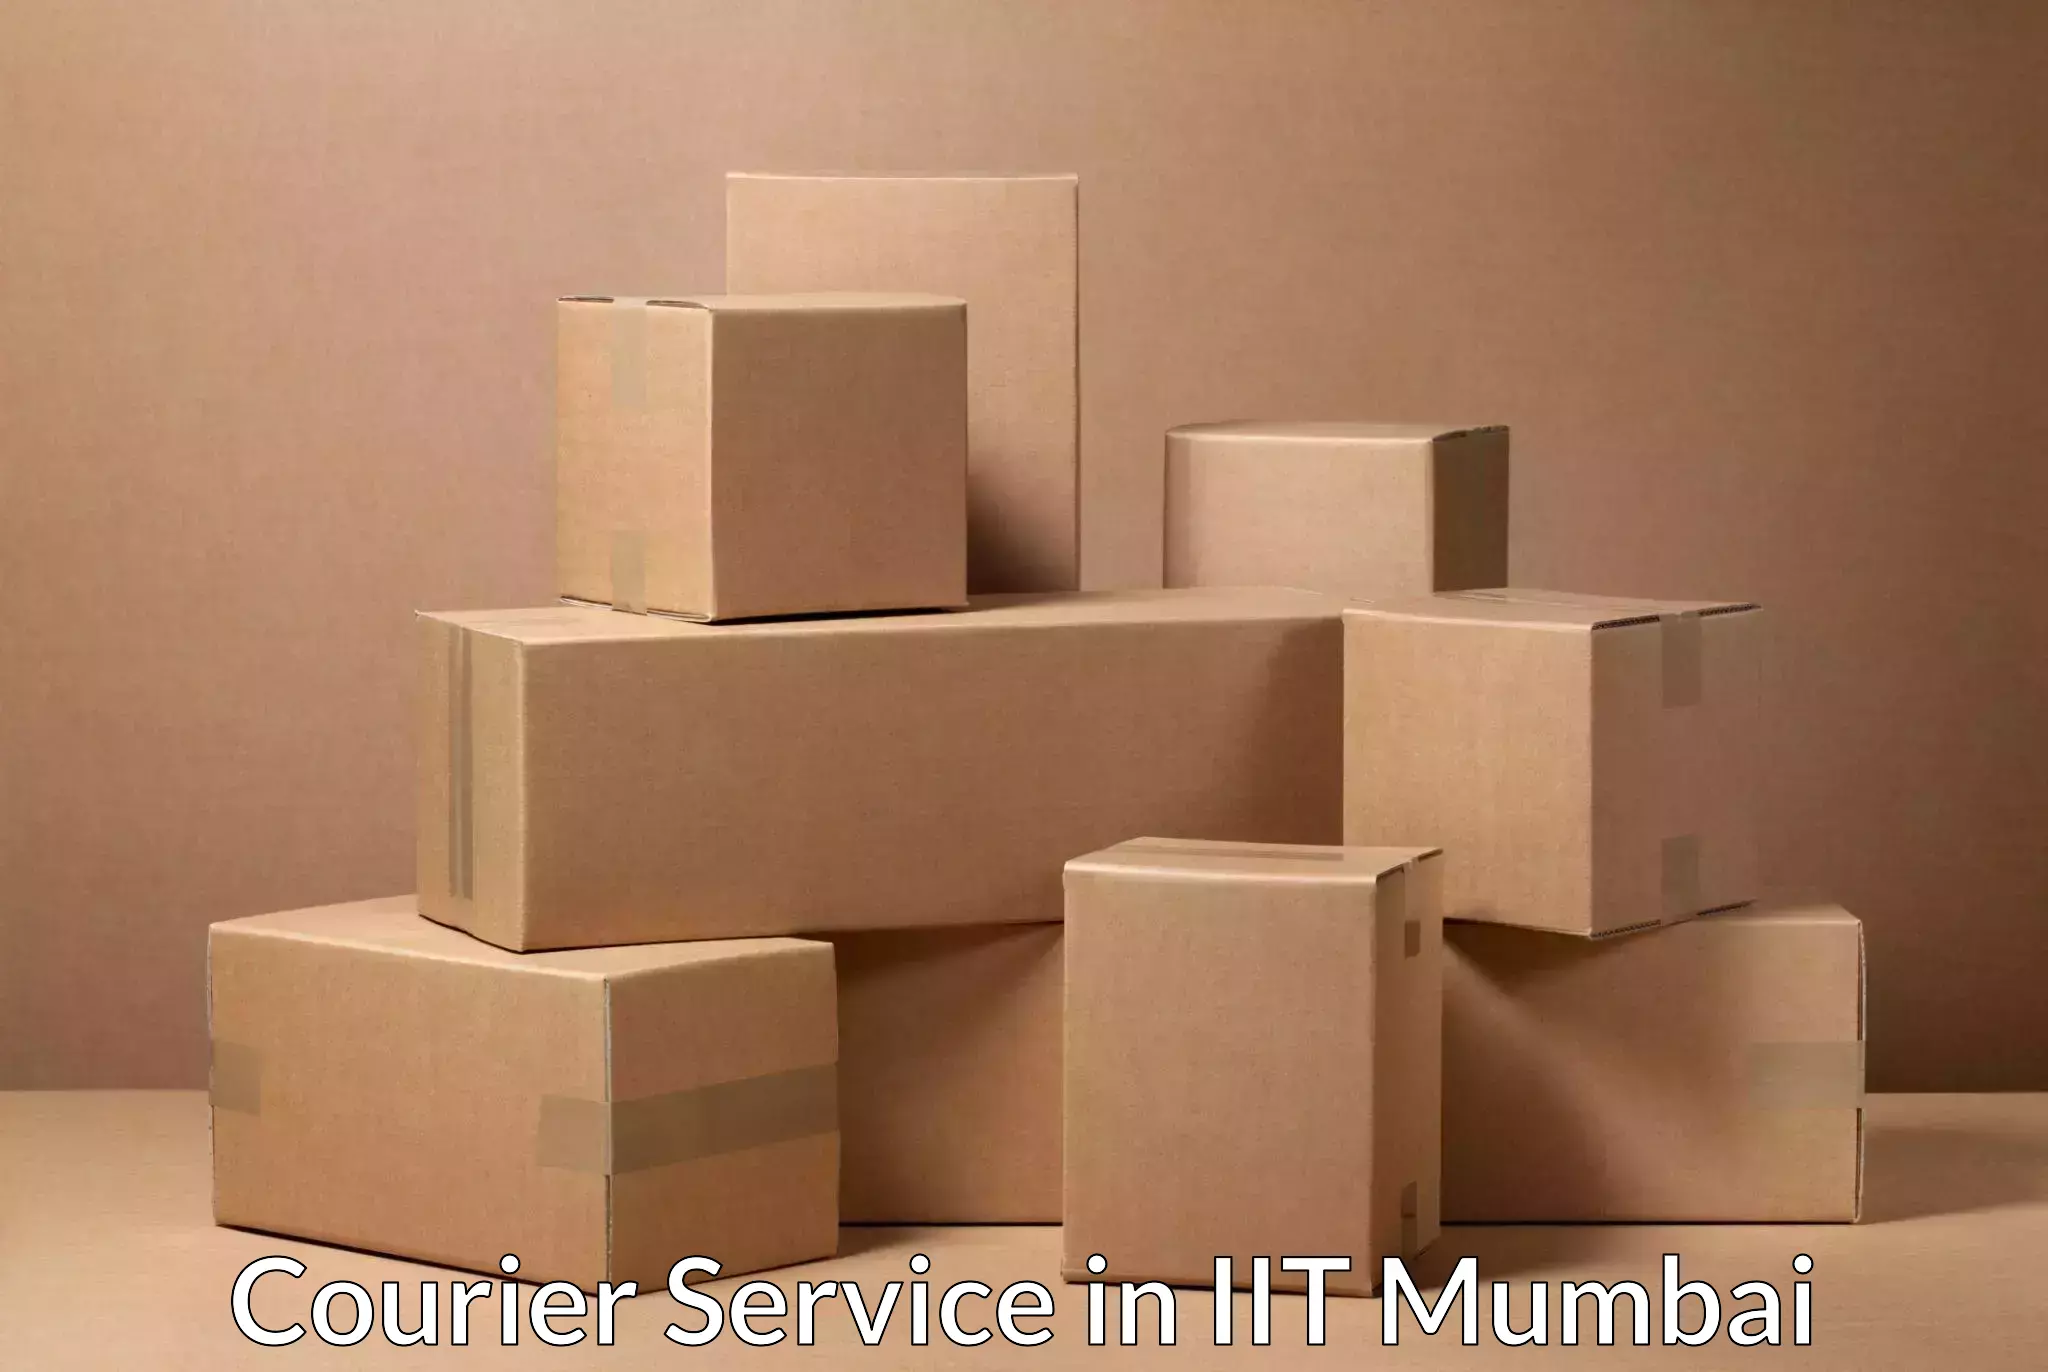 Same-day delivery solutions in IIT Mumbai